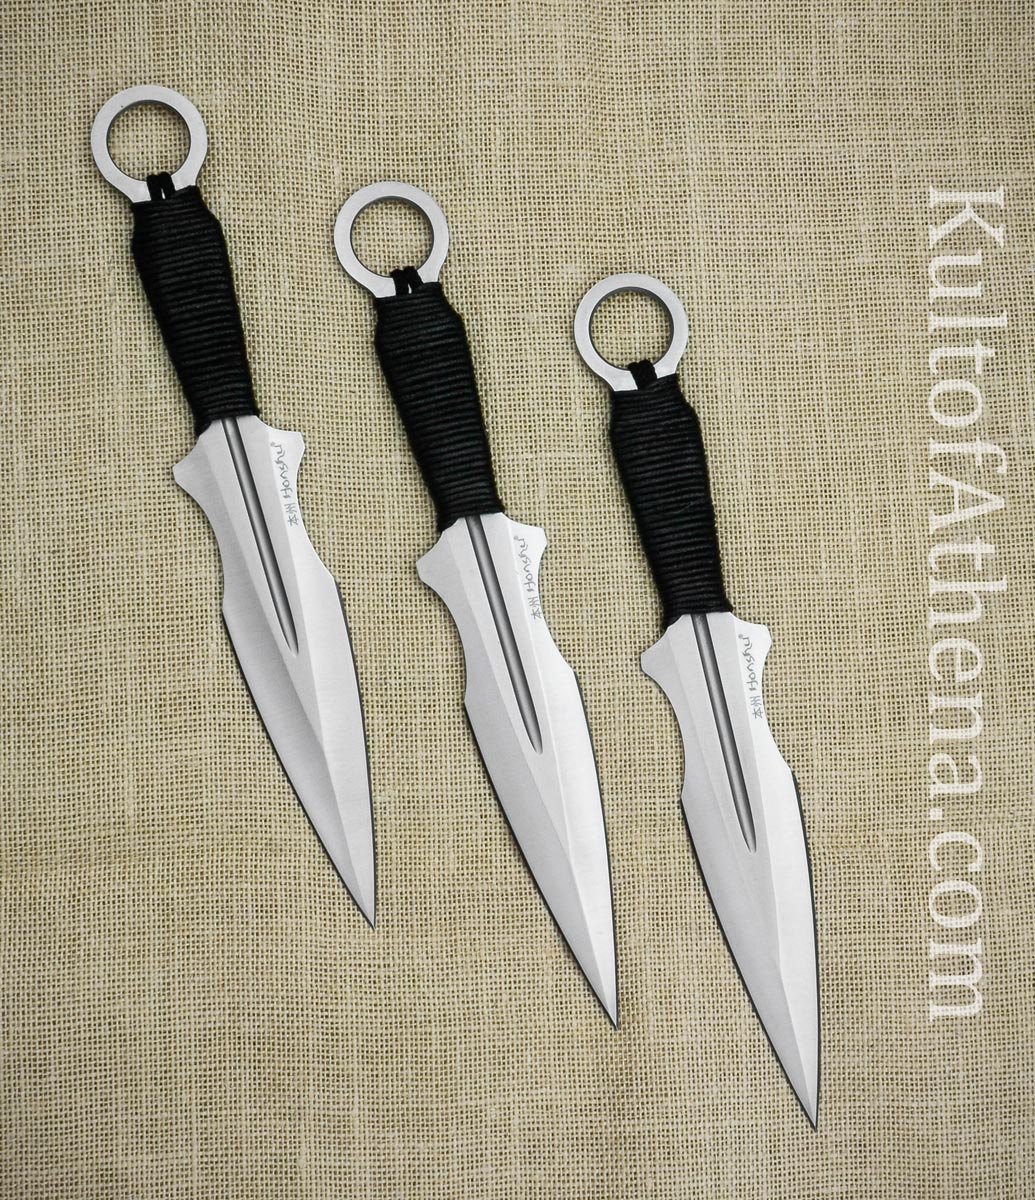 Kunai Photos, Images and Pictures